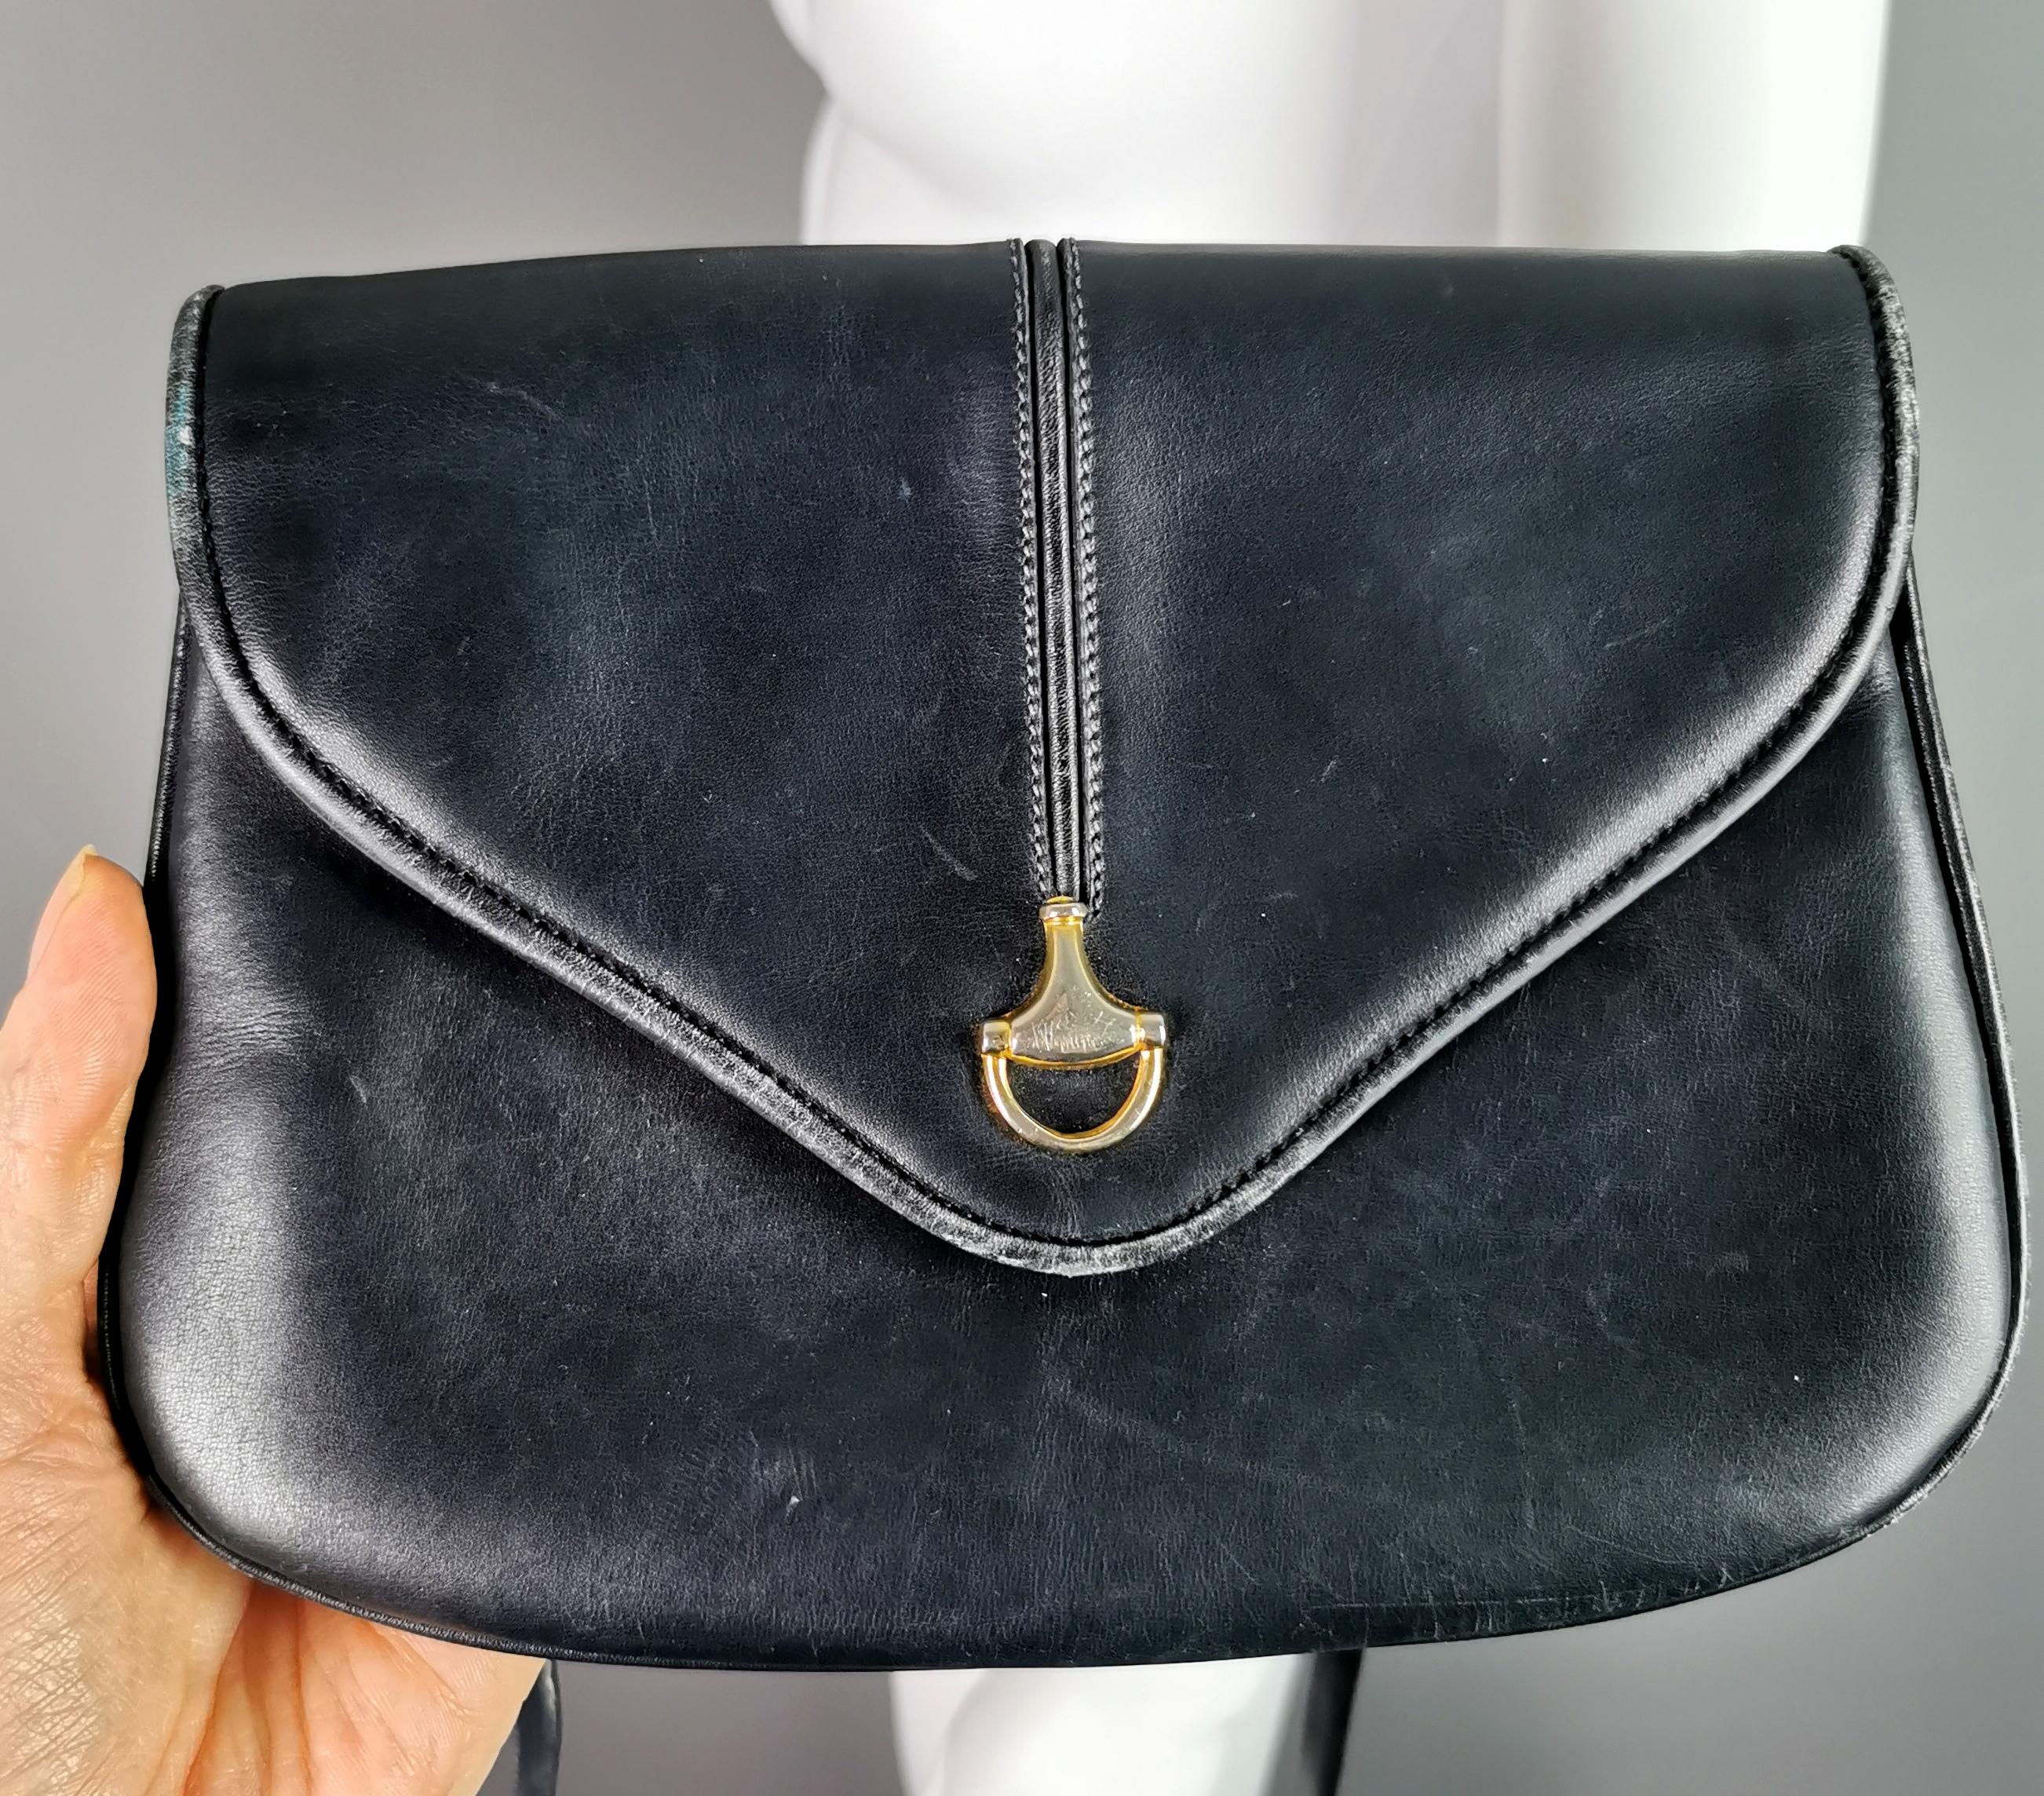 A rare vintage c1960s Gucci navy leather handbag.

It is a shoulder or Crossbody style bag, small sized with a long strap, the front has an envelope style closure with a gold tone half horsebit embellishment.

The long leather handle can be detached